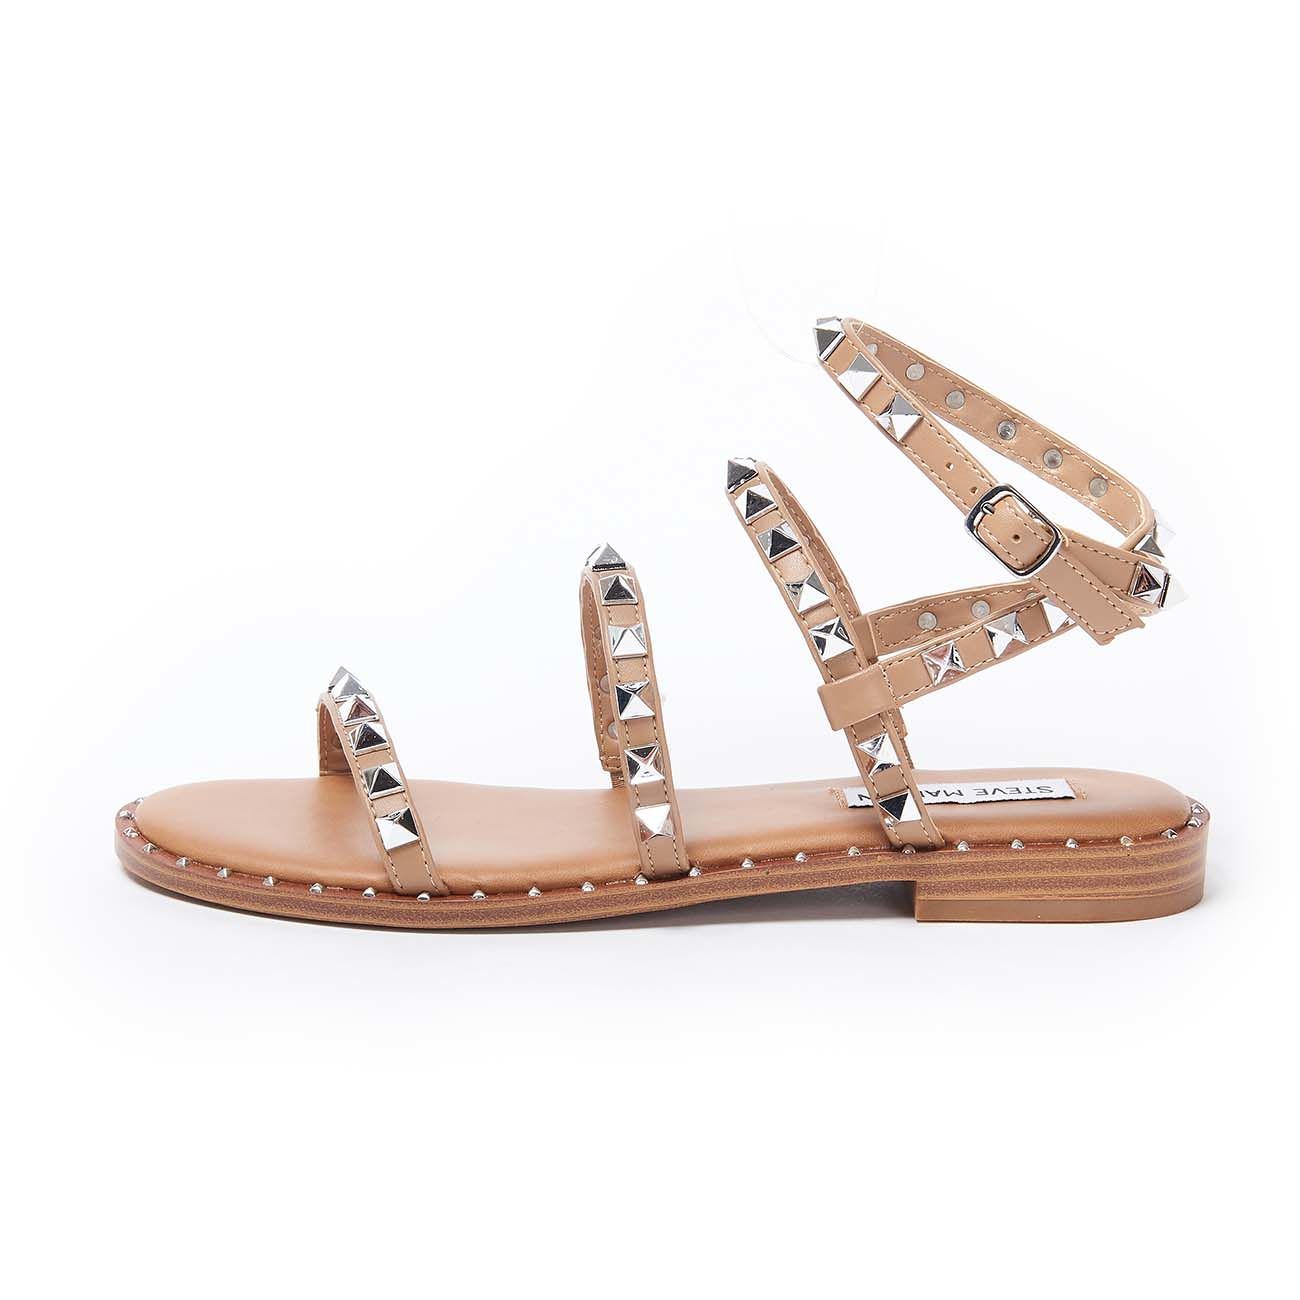 STEVE MADDEN TRAVEL FAUX LEATHER SANDALS WITH STUDS Woman Tan